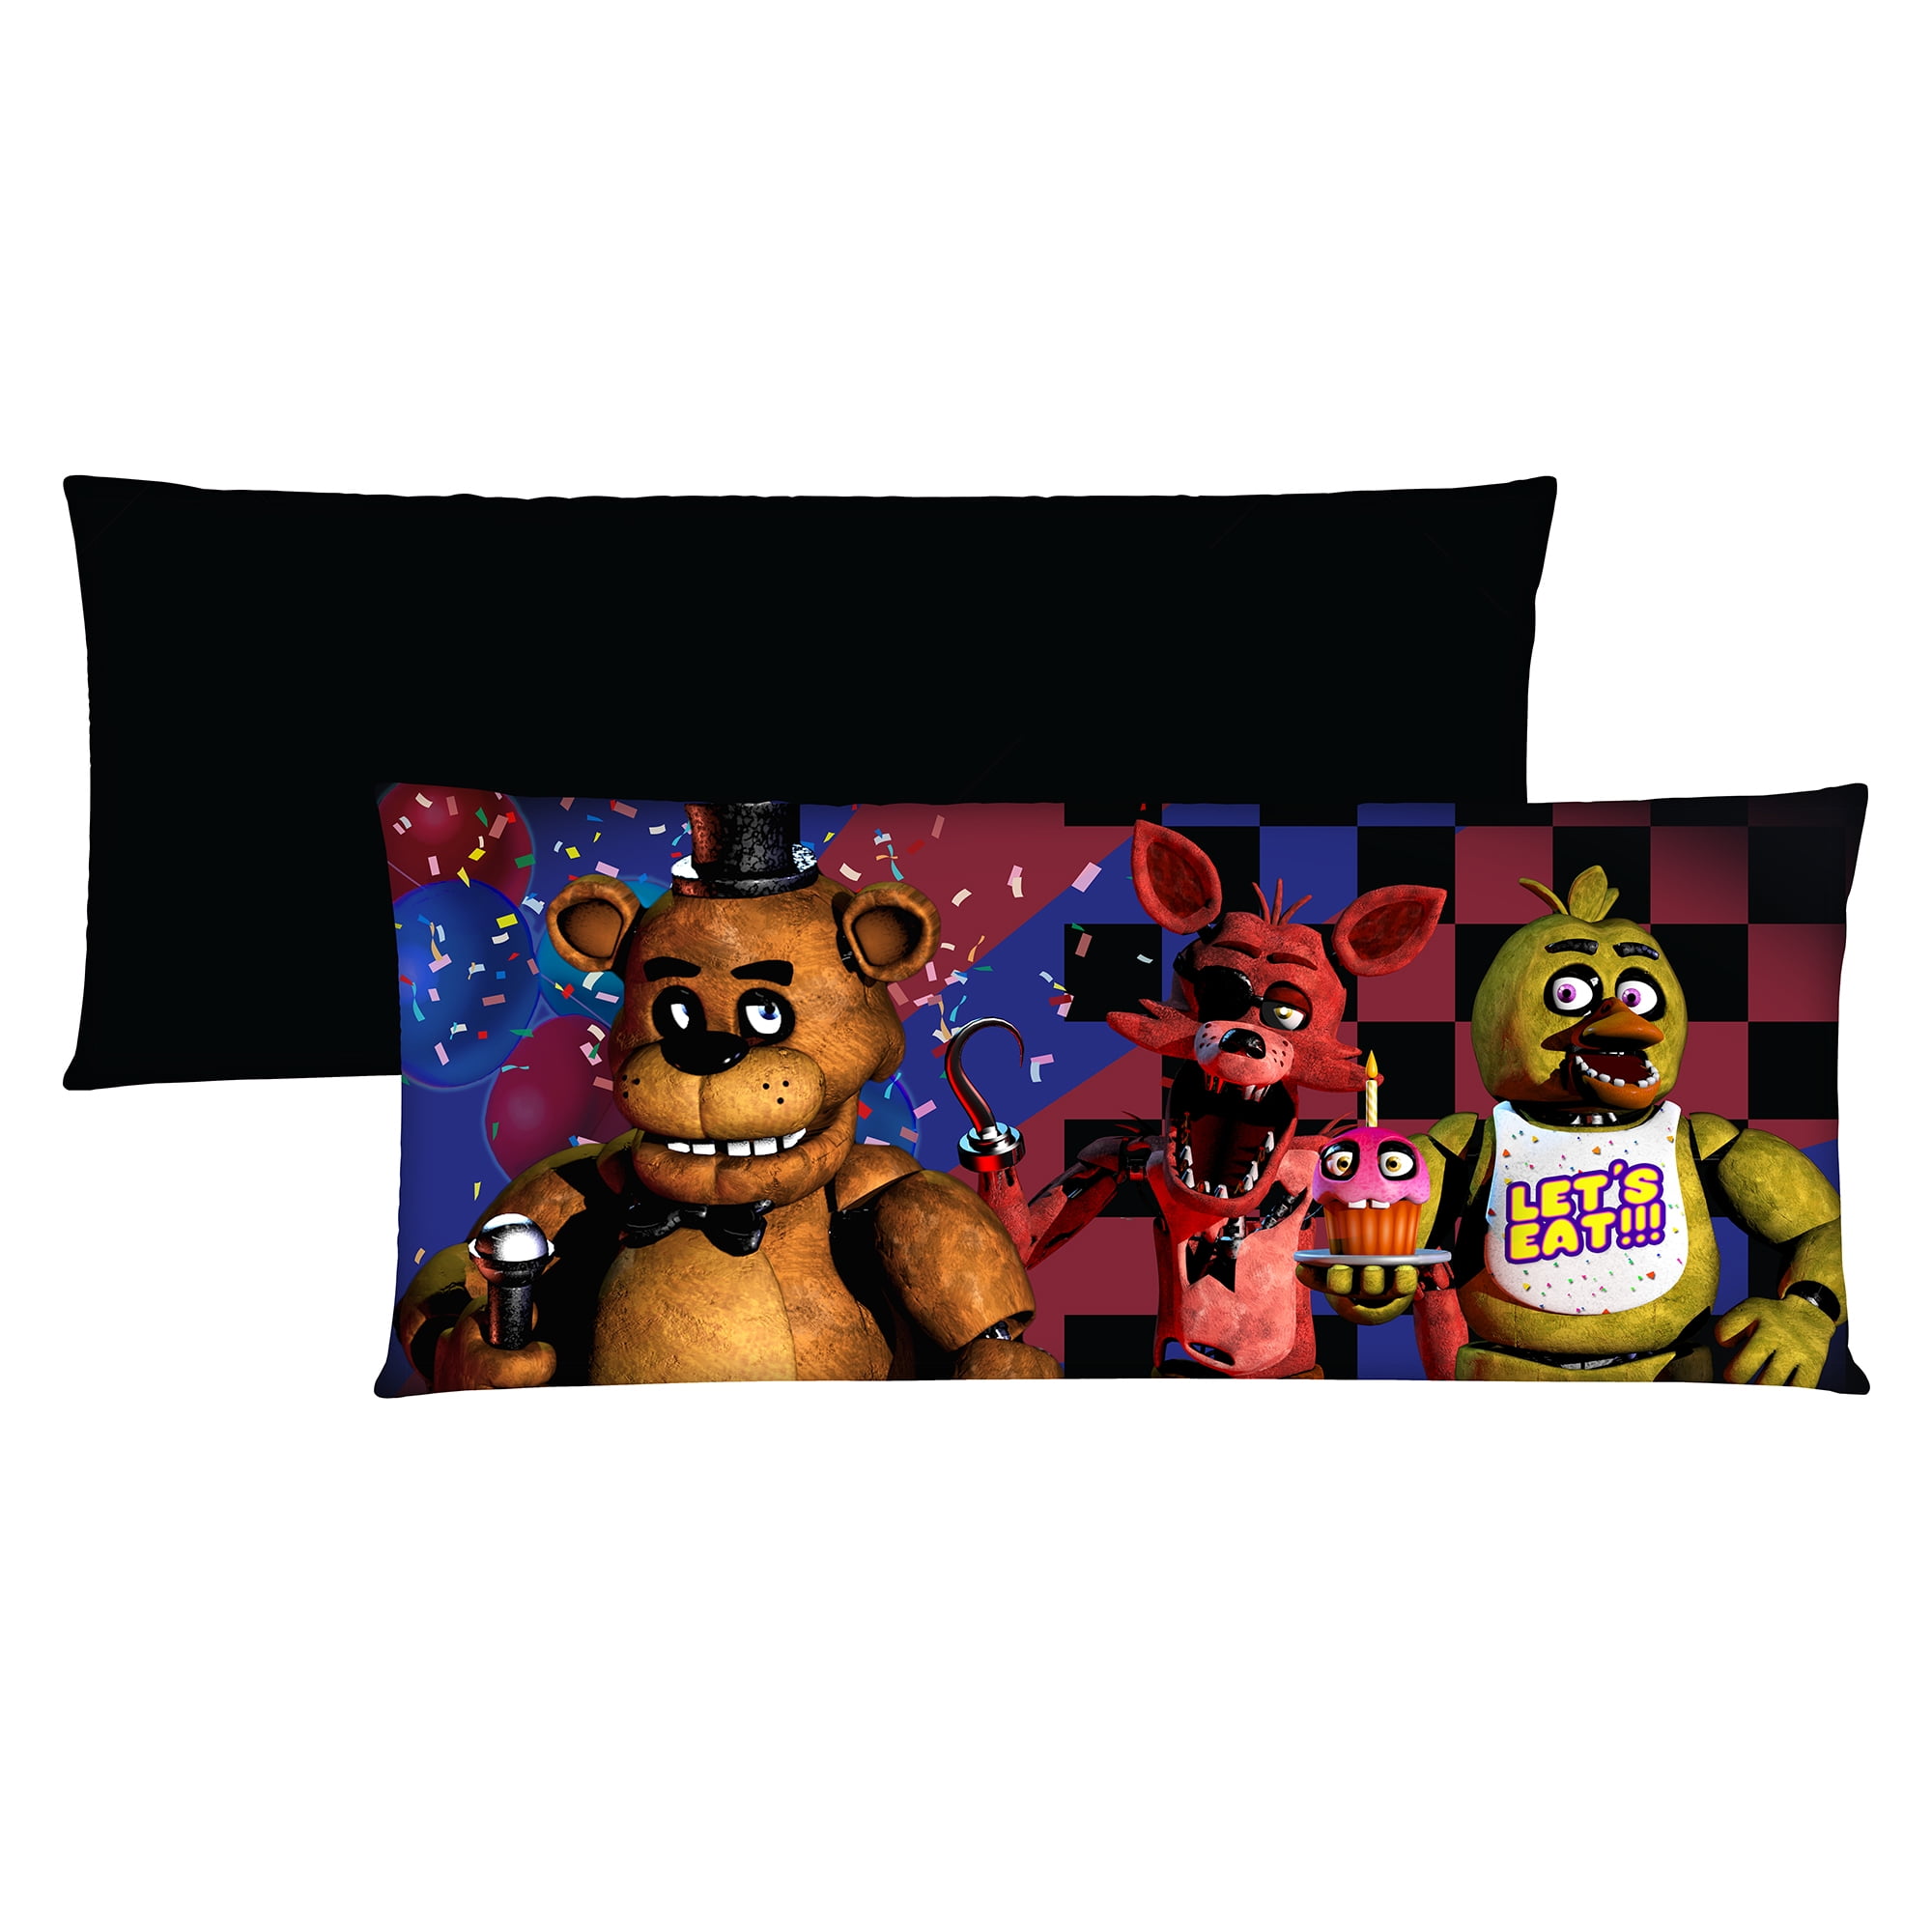 Body Pillow for Kids Top 15 Best Kids Pillows in 2020 Five Nights at Freddy...